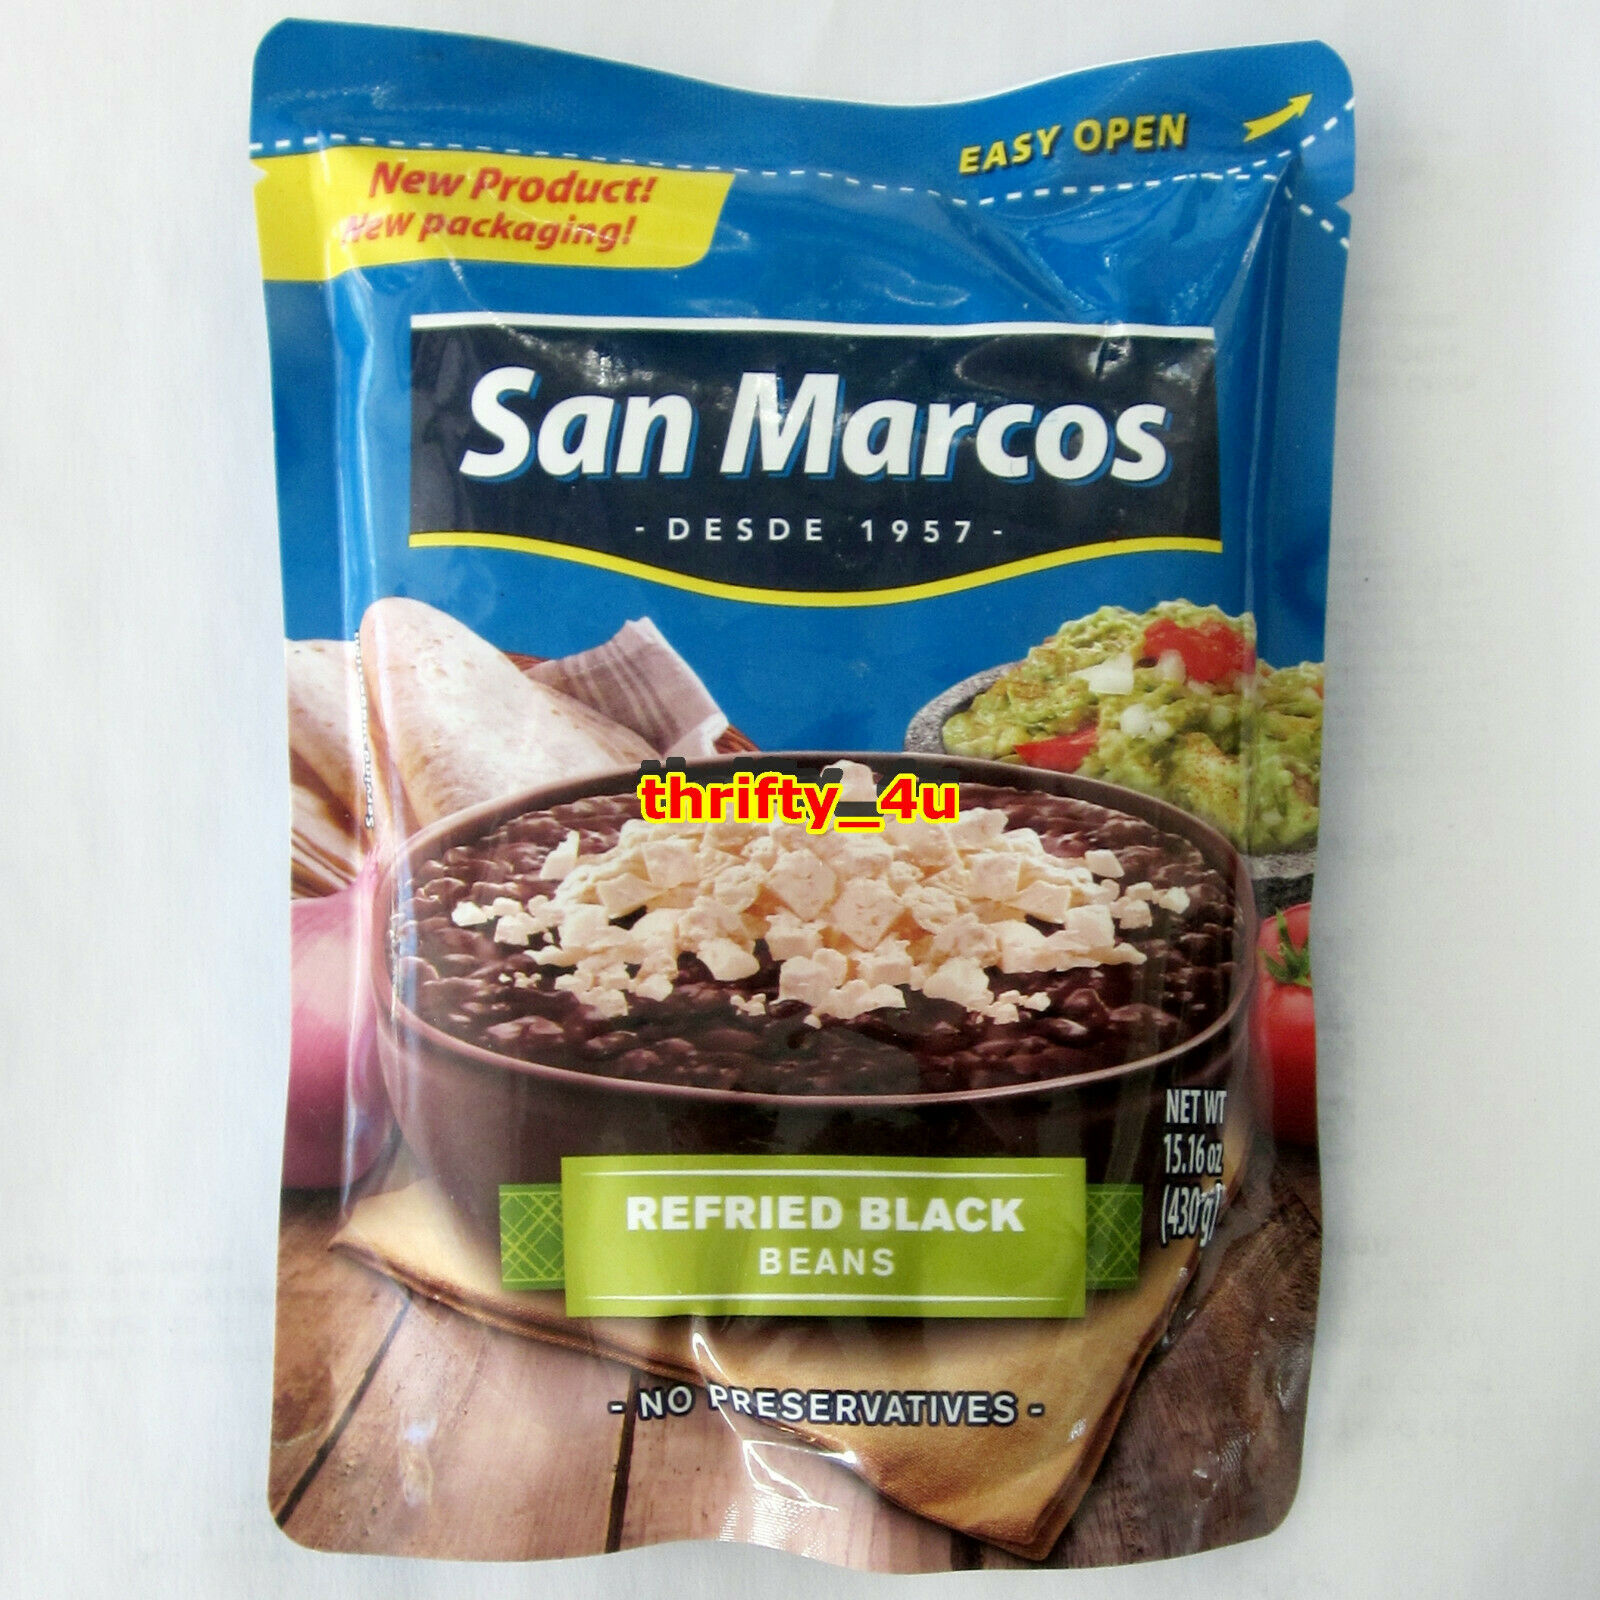 San Marcos Brand REFRIED (Black) Beans One Easy Open Pouch, 15oz (430g) Frijoles - $1.05